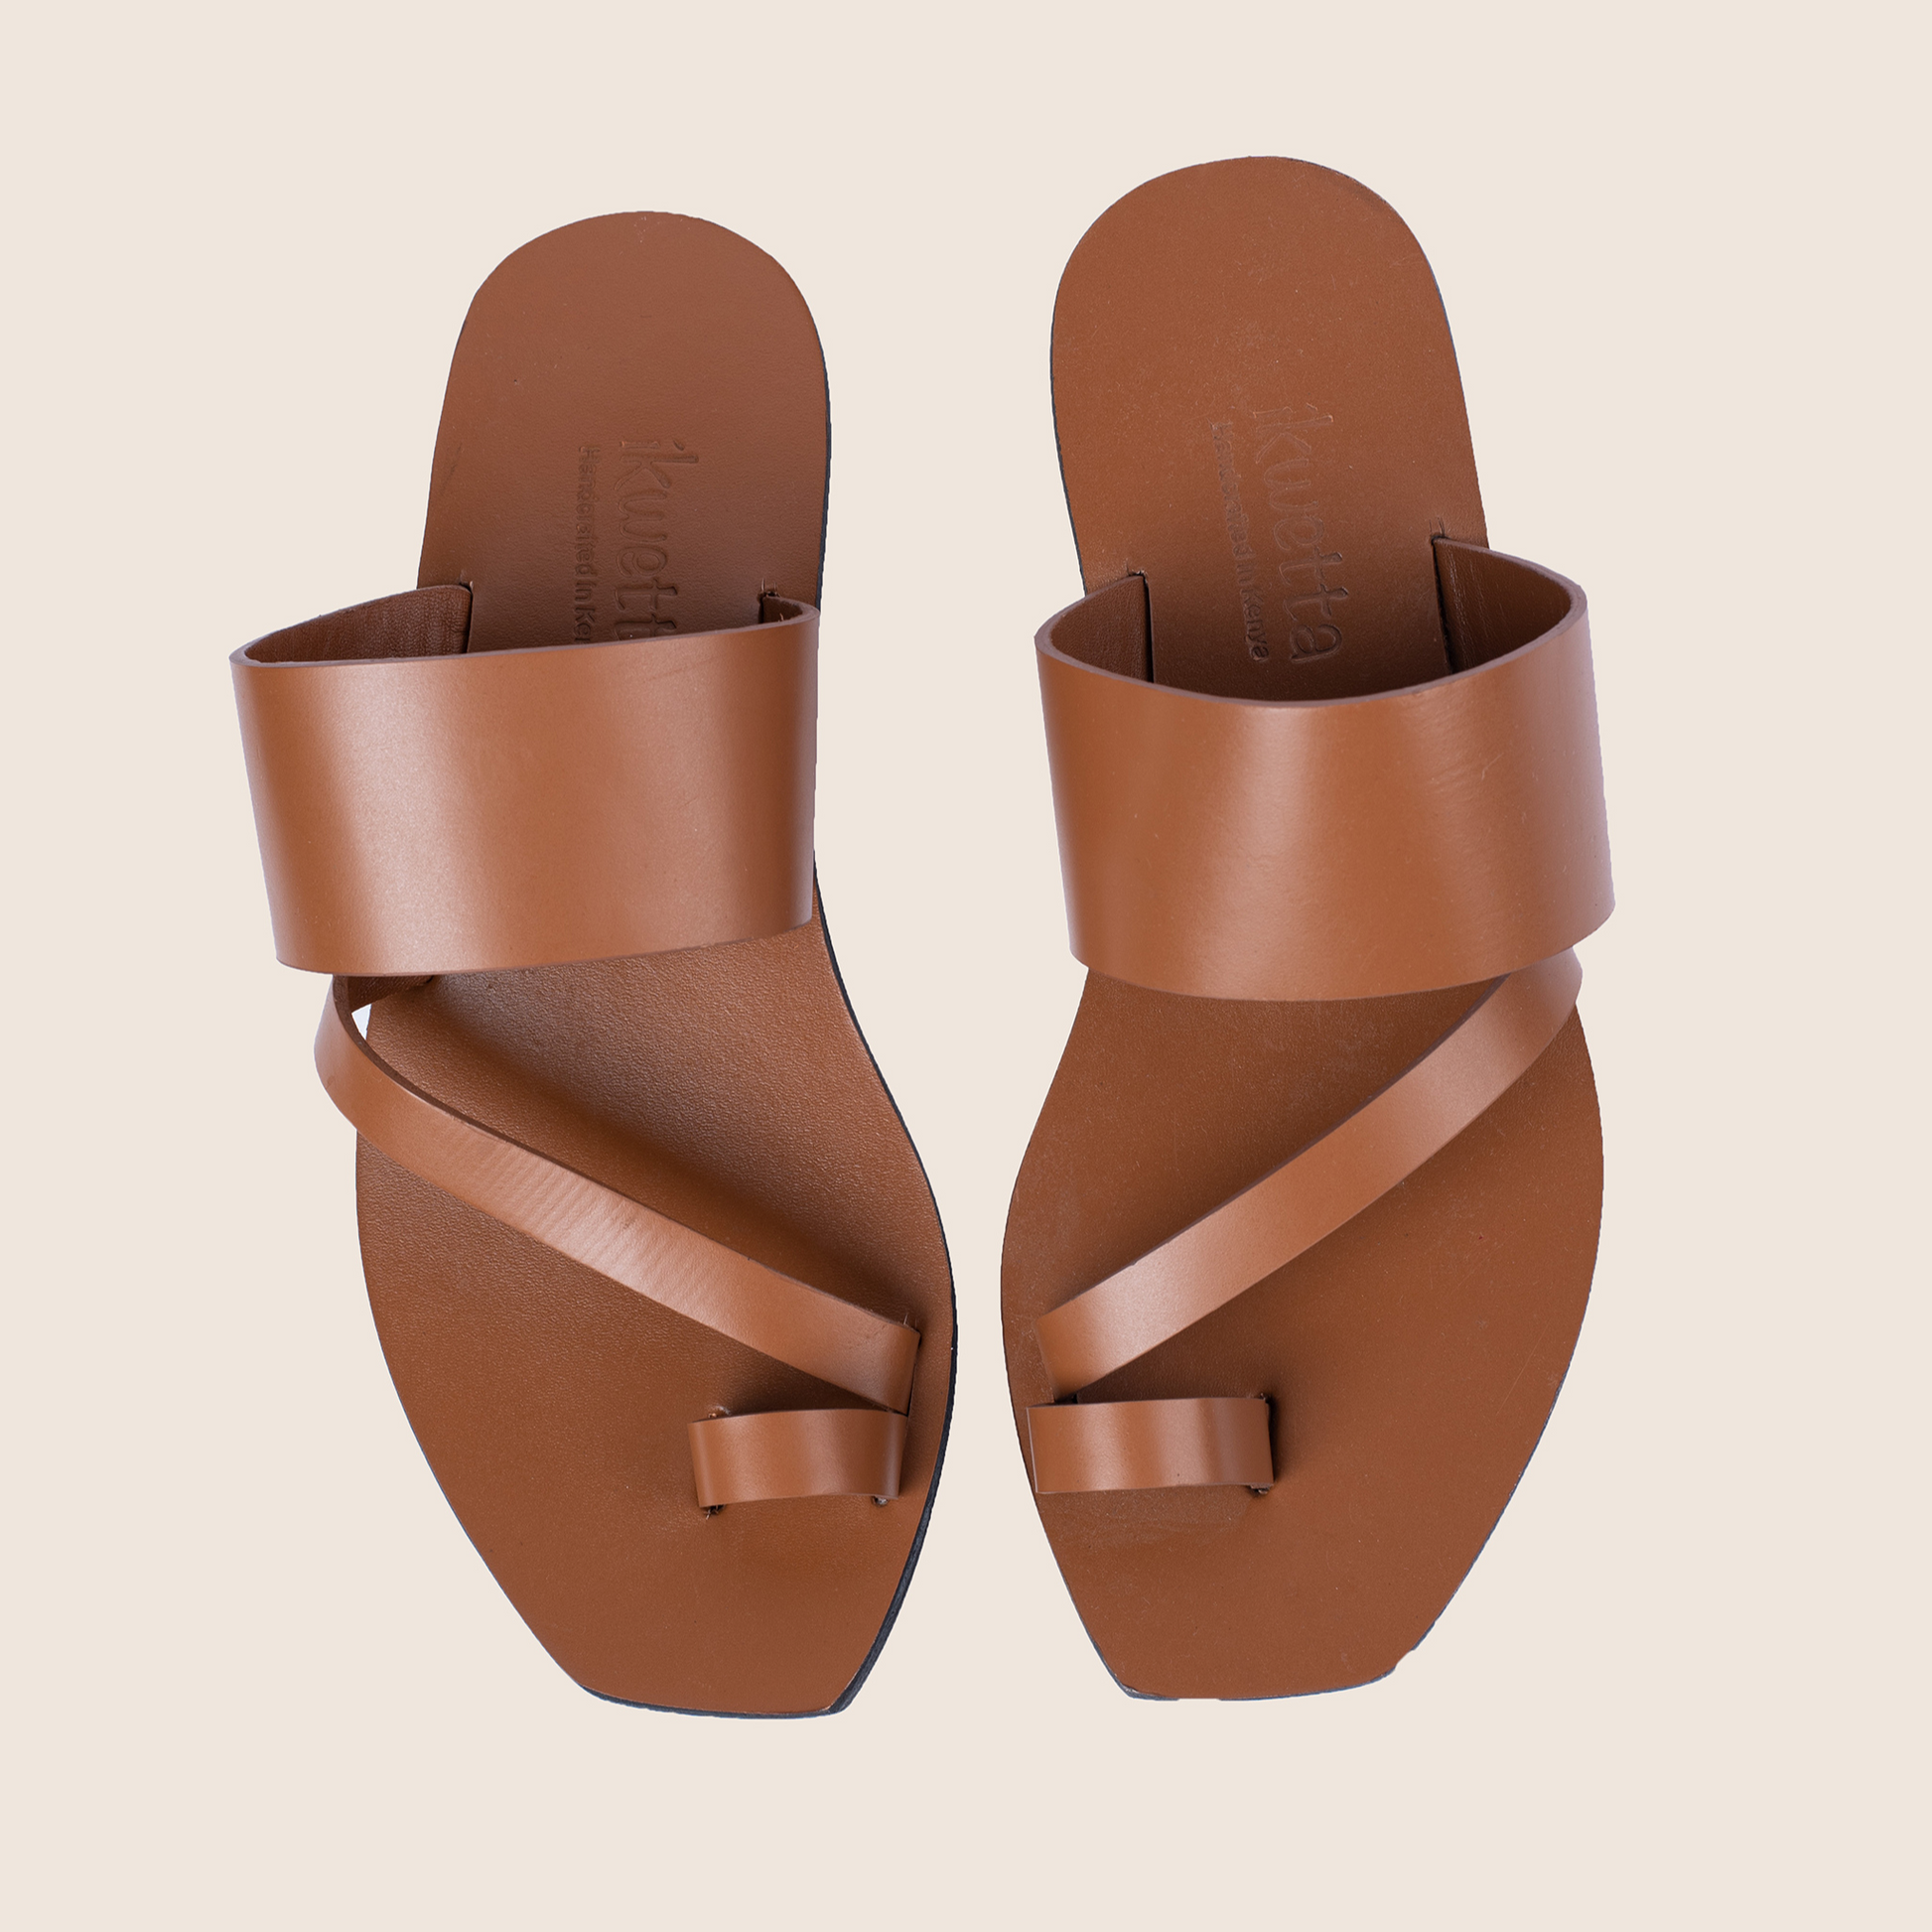 Helena sandals in caramel smooth leather 